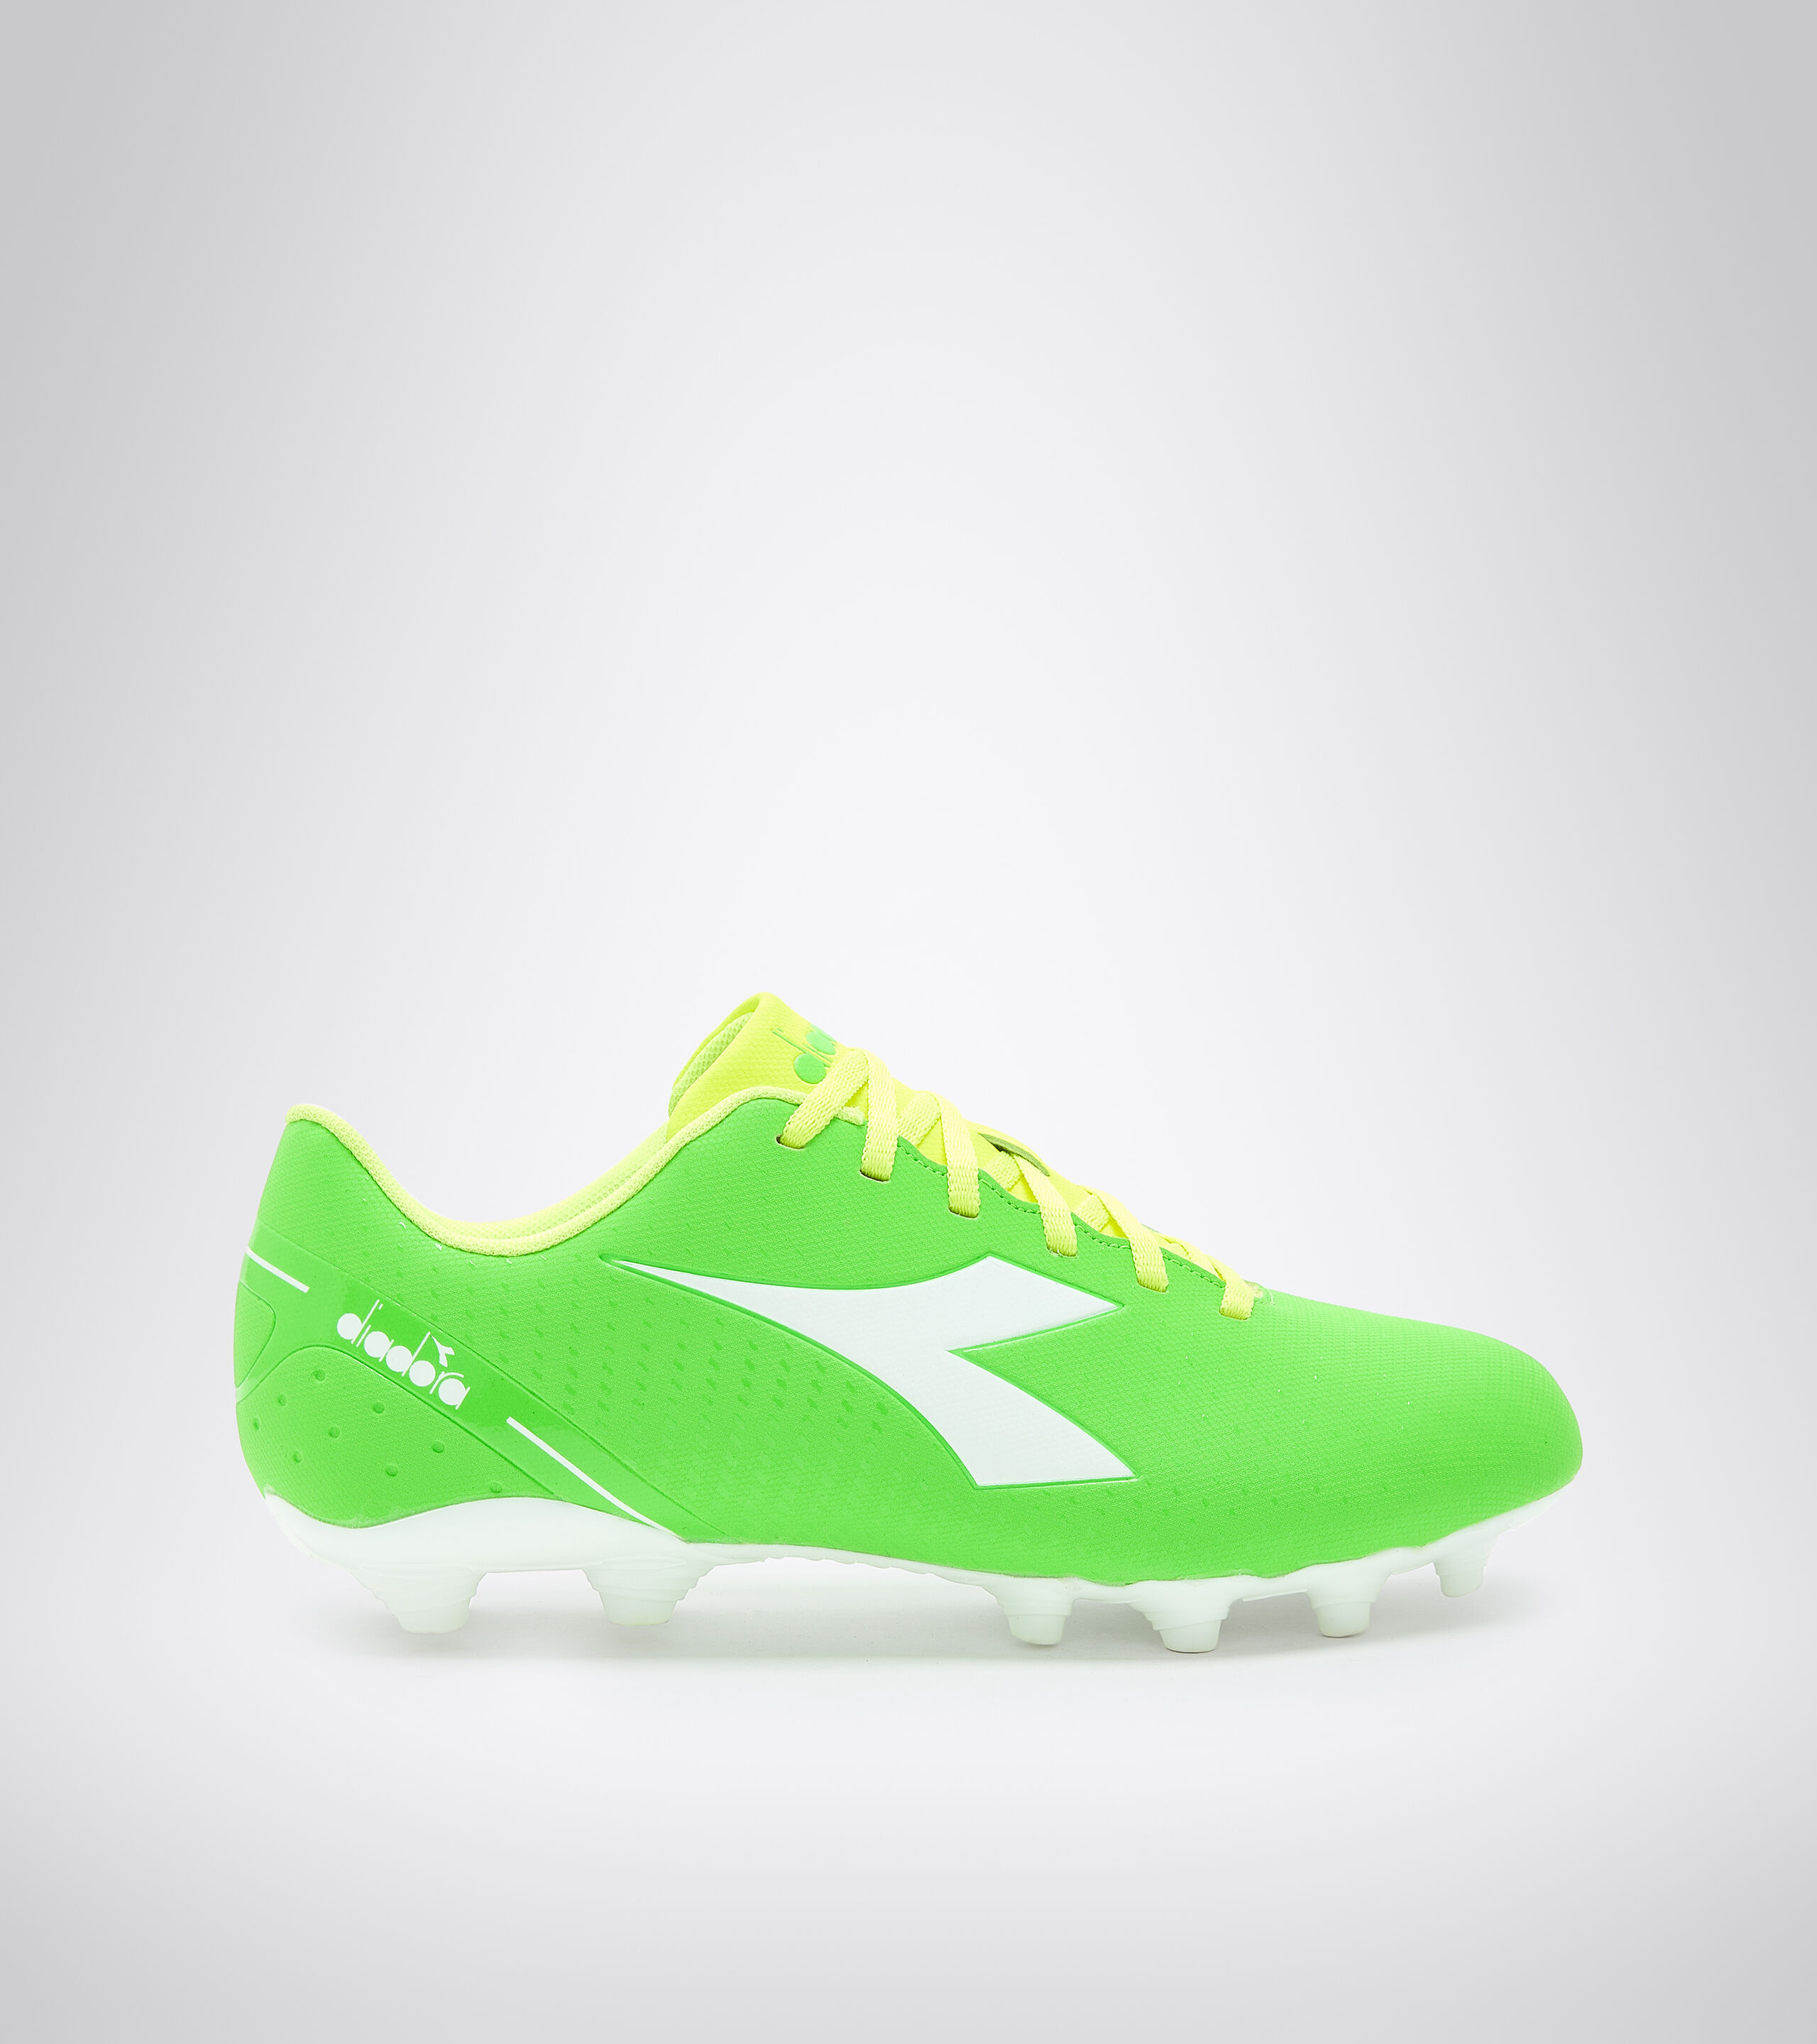 Details about   Diadora Soccer Men's Cambio MD PU Soccer Cleat,royal/Fluorescent Yellow 8.5 NIB 